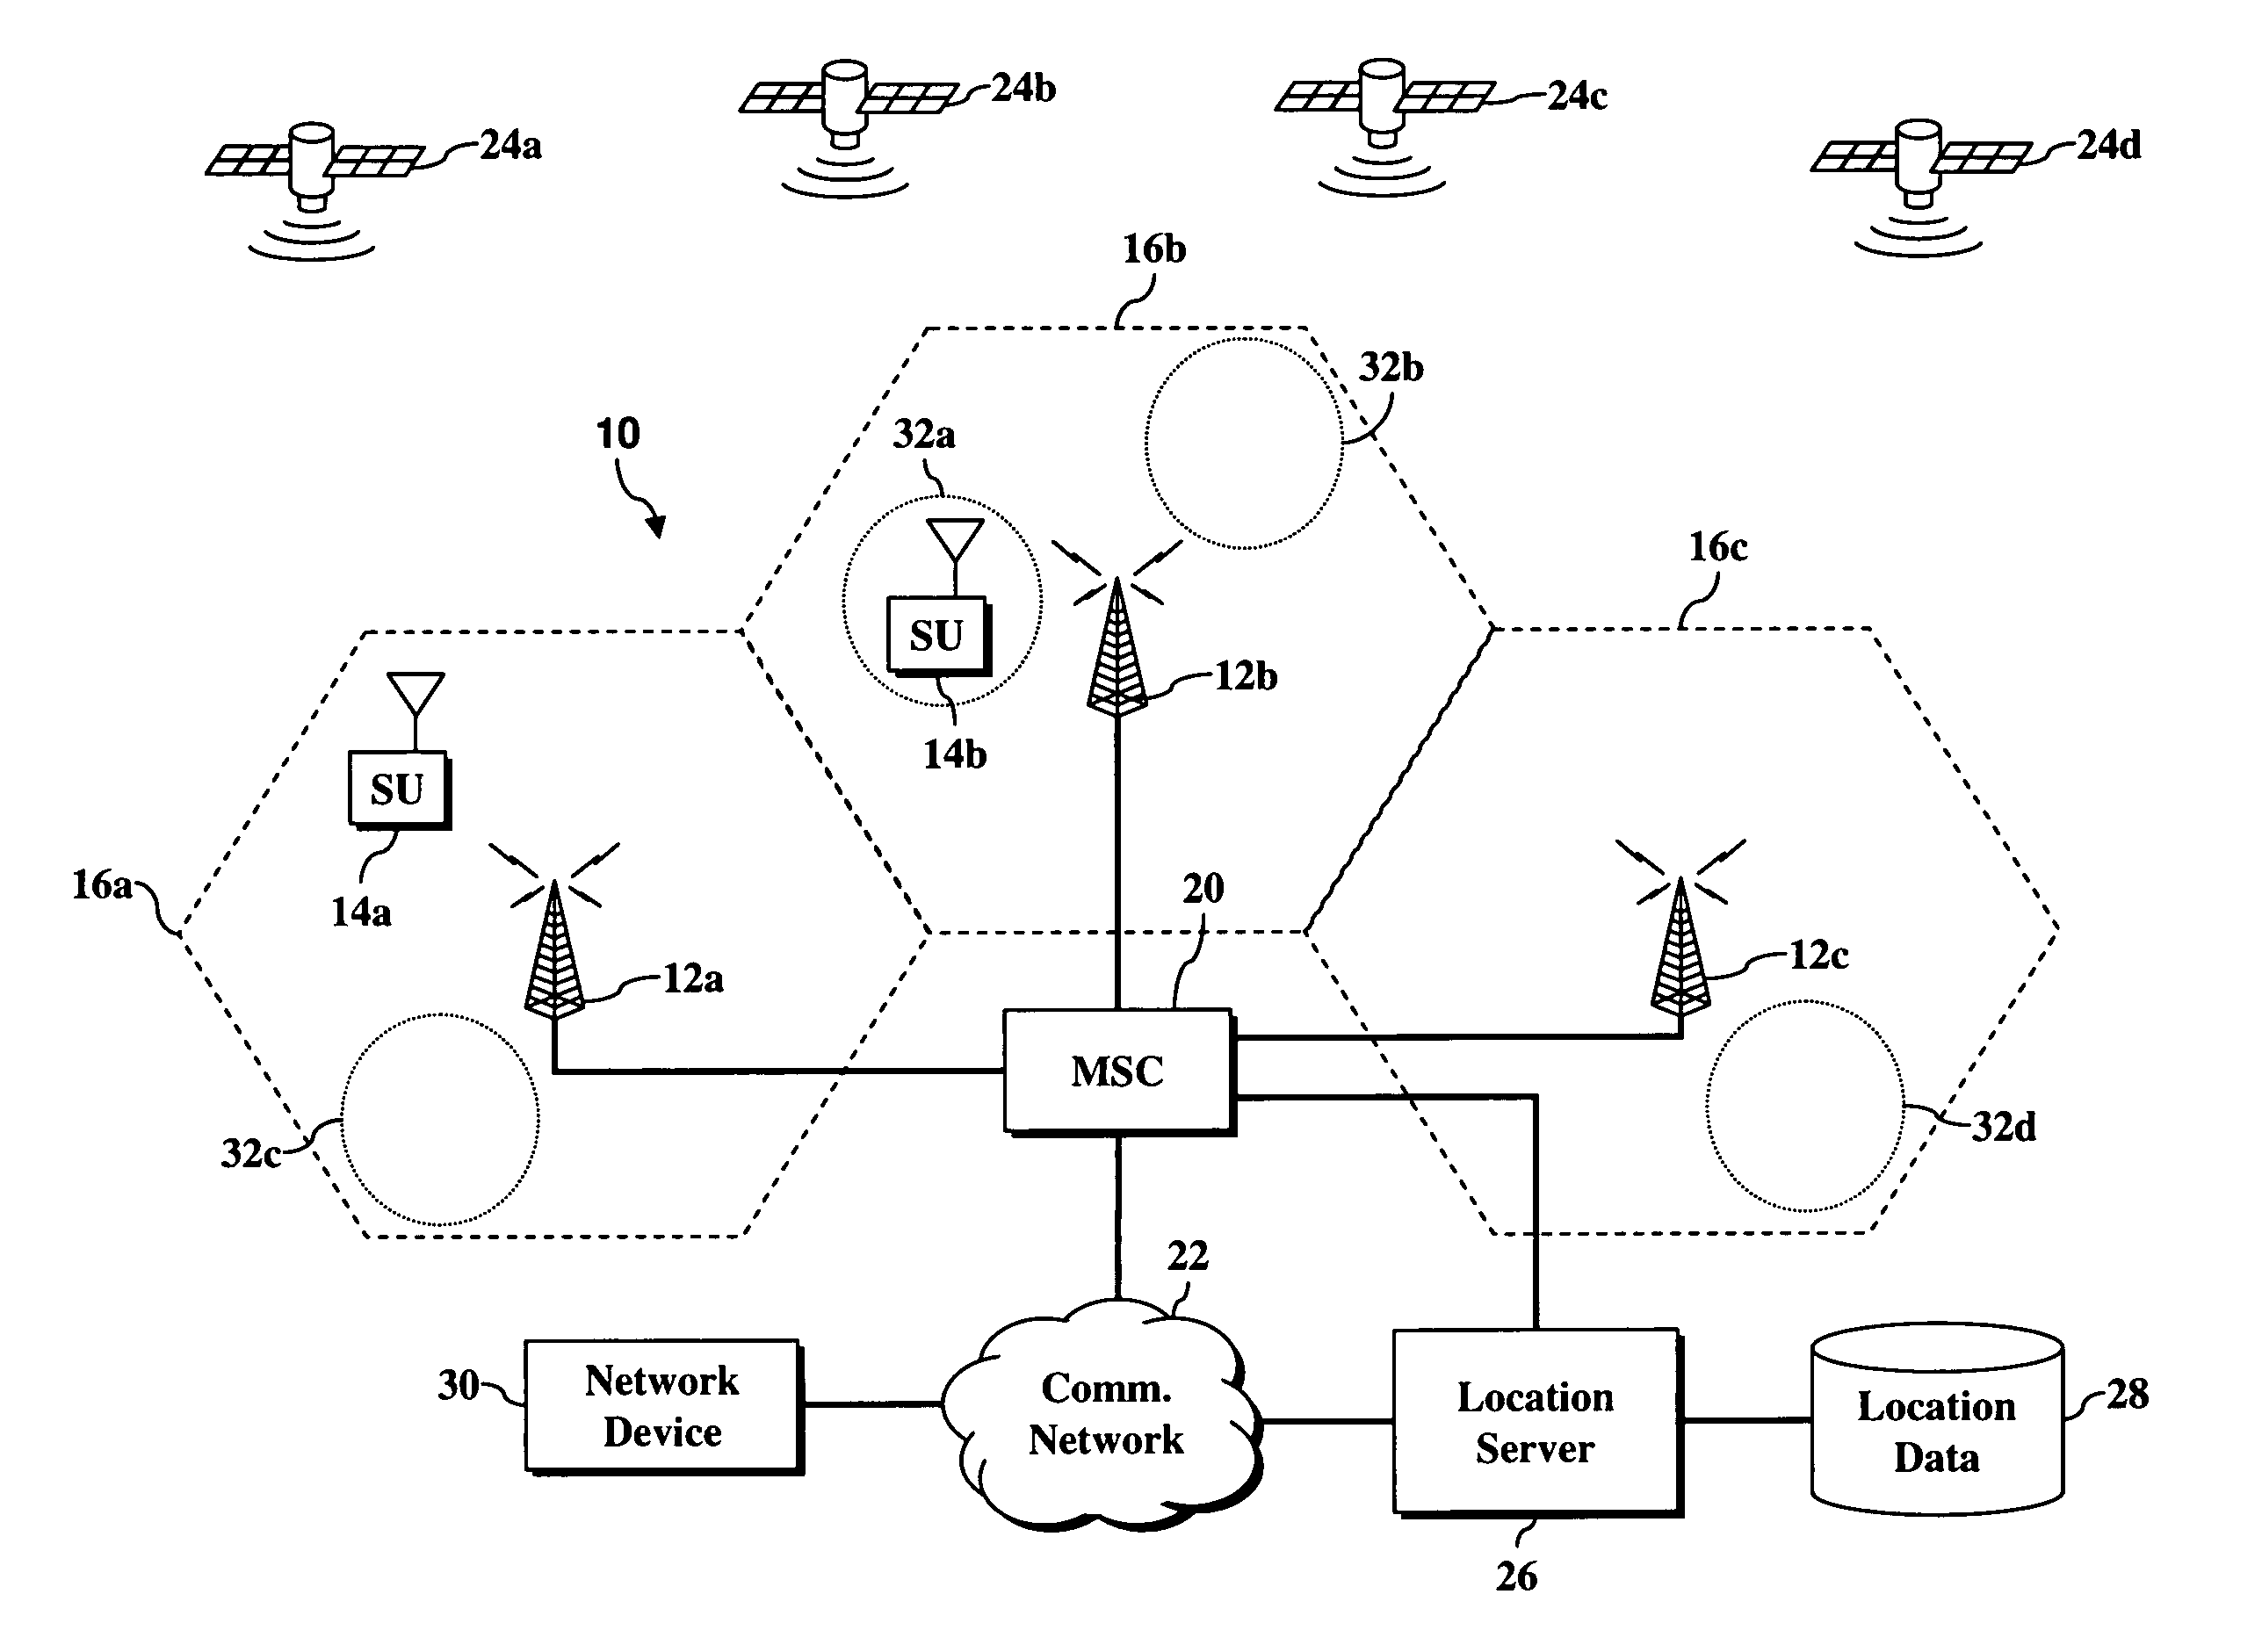 System and method for recovering a lost or stolen wireless device